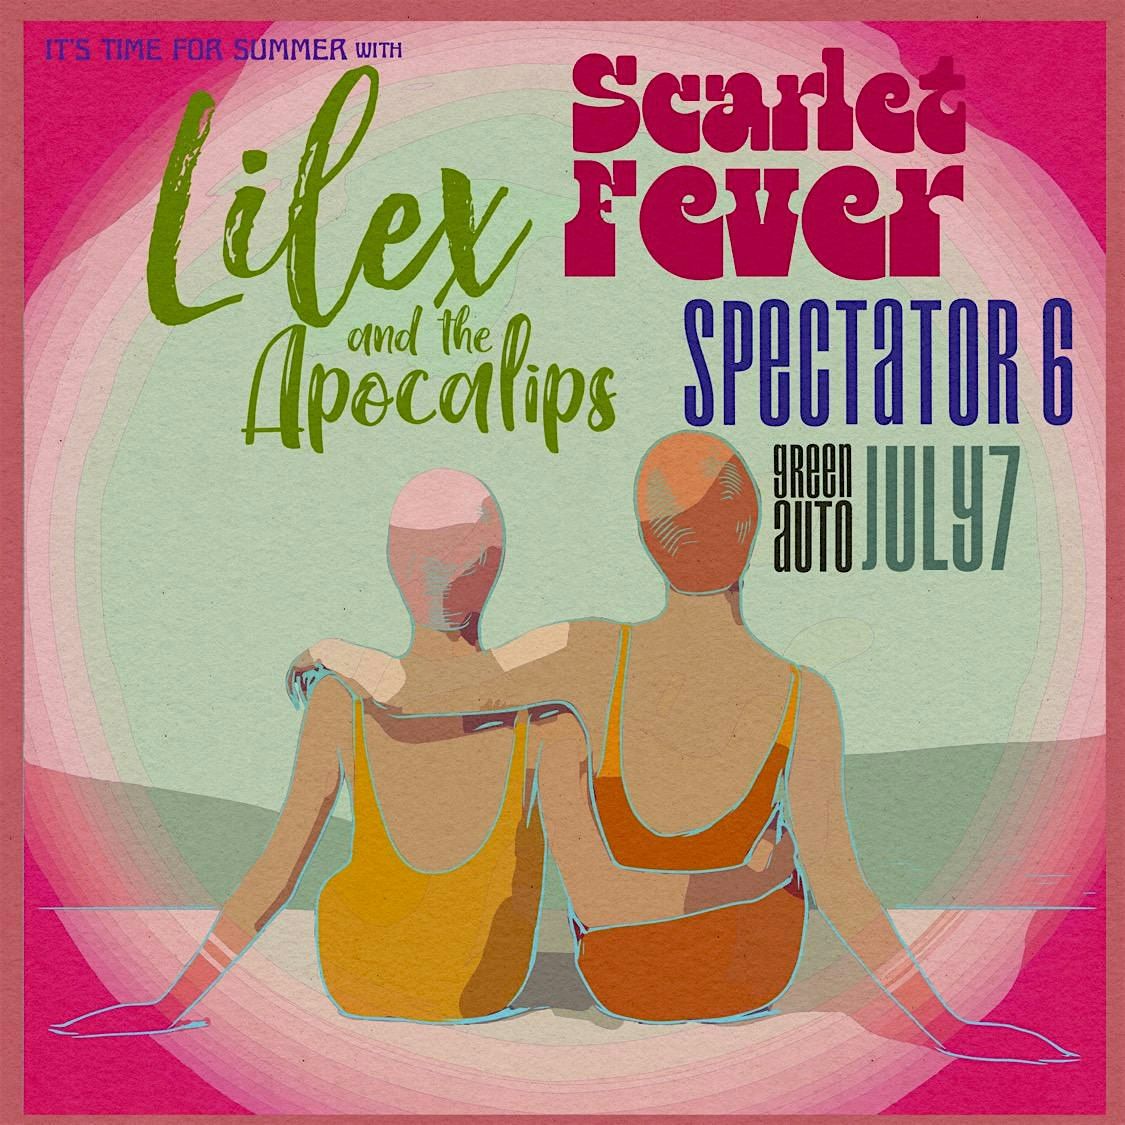 Lilex and the Apocalips, Scarlet Fever, Spectator 6